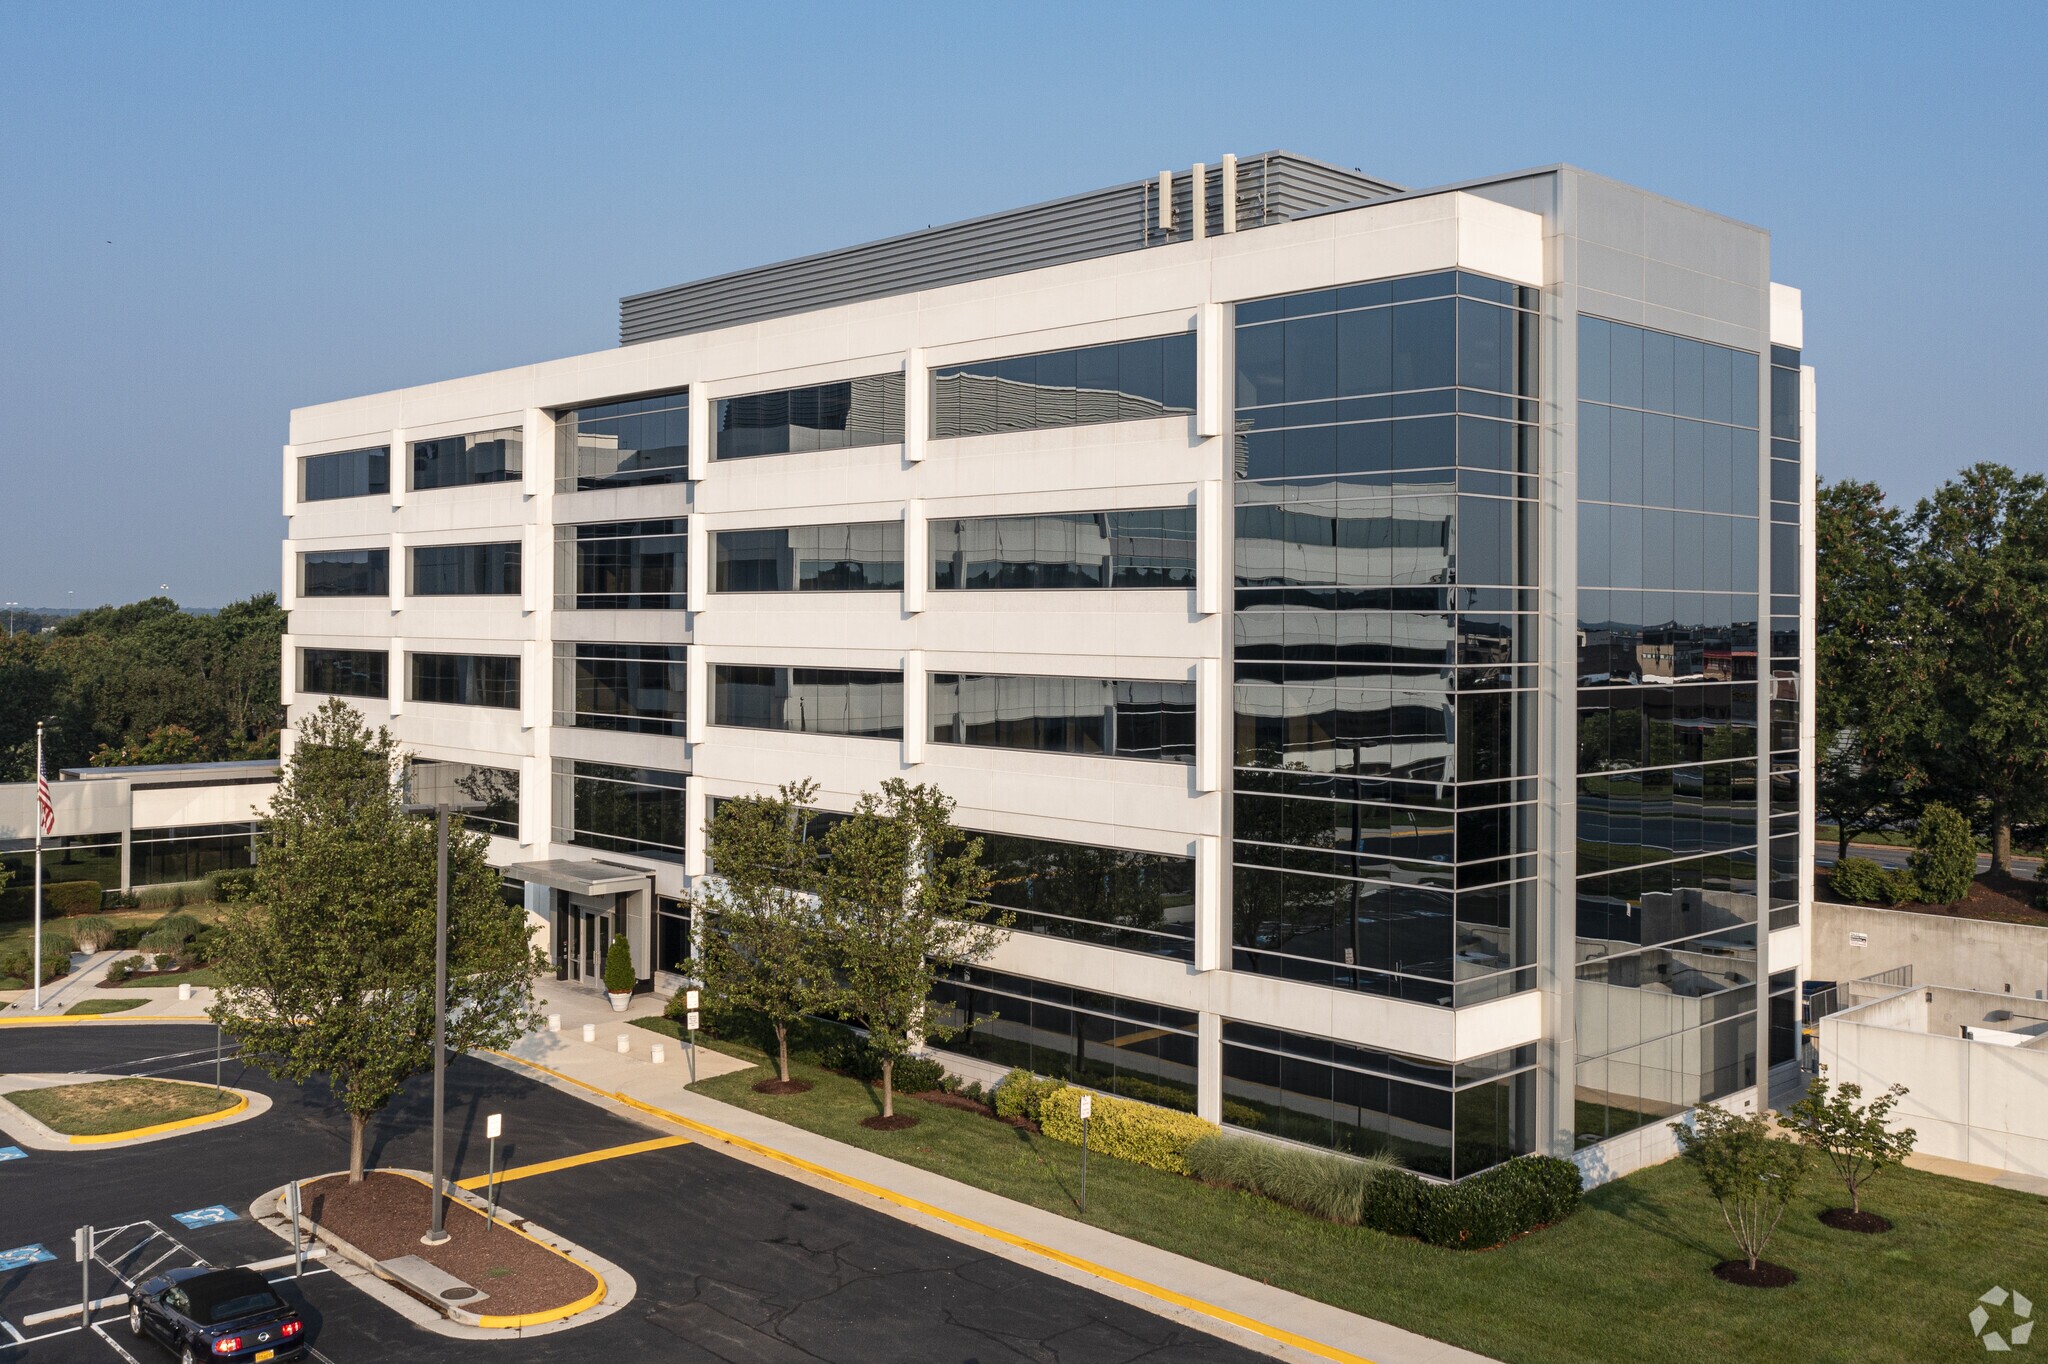 Amentum Services is moving its headquarters to a 45,600-square-foot space at 4800 Westfields Blvd. in Chantilly, Virginia. (CoStar)